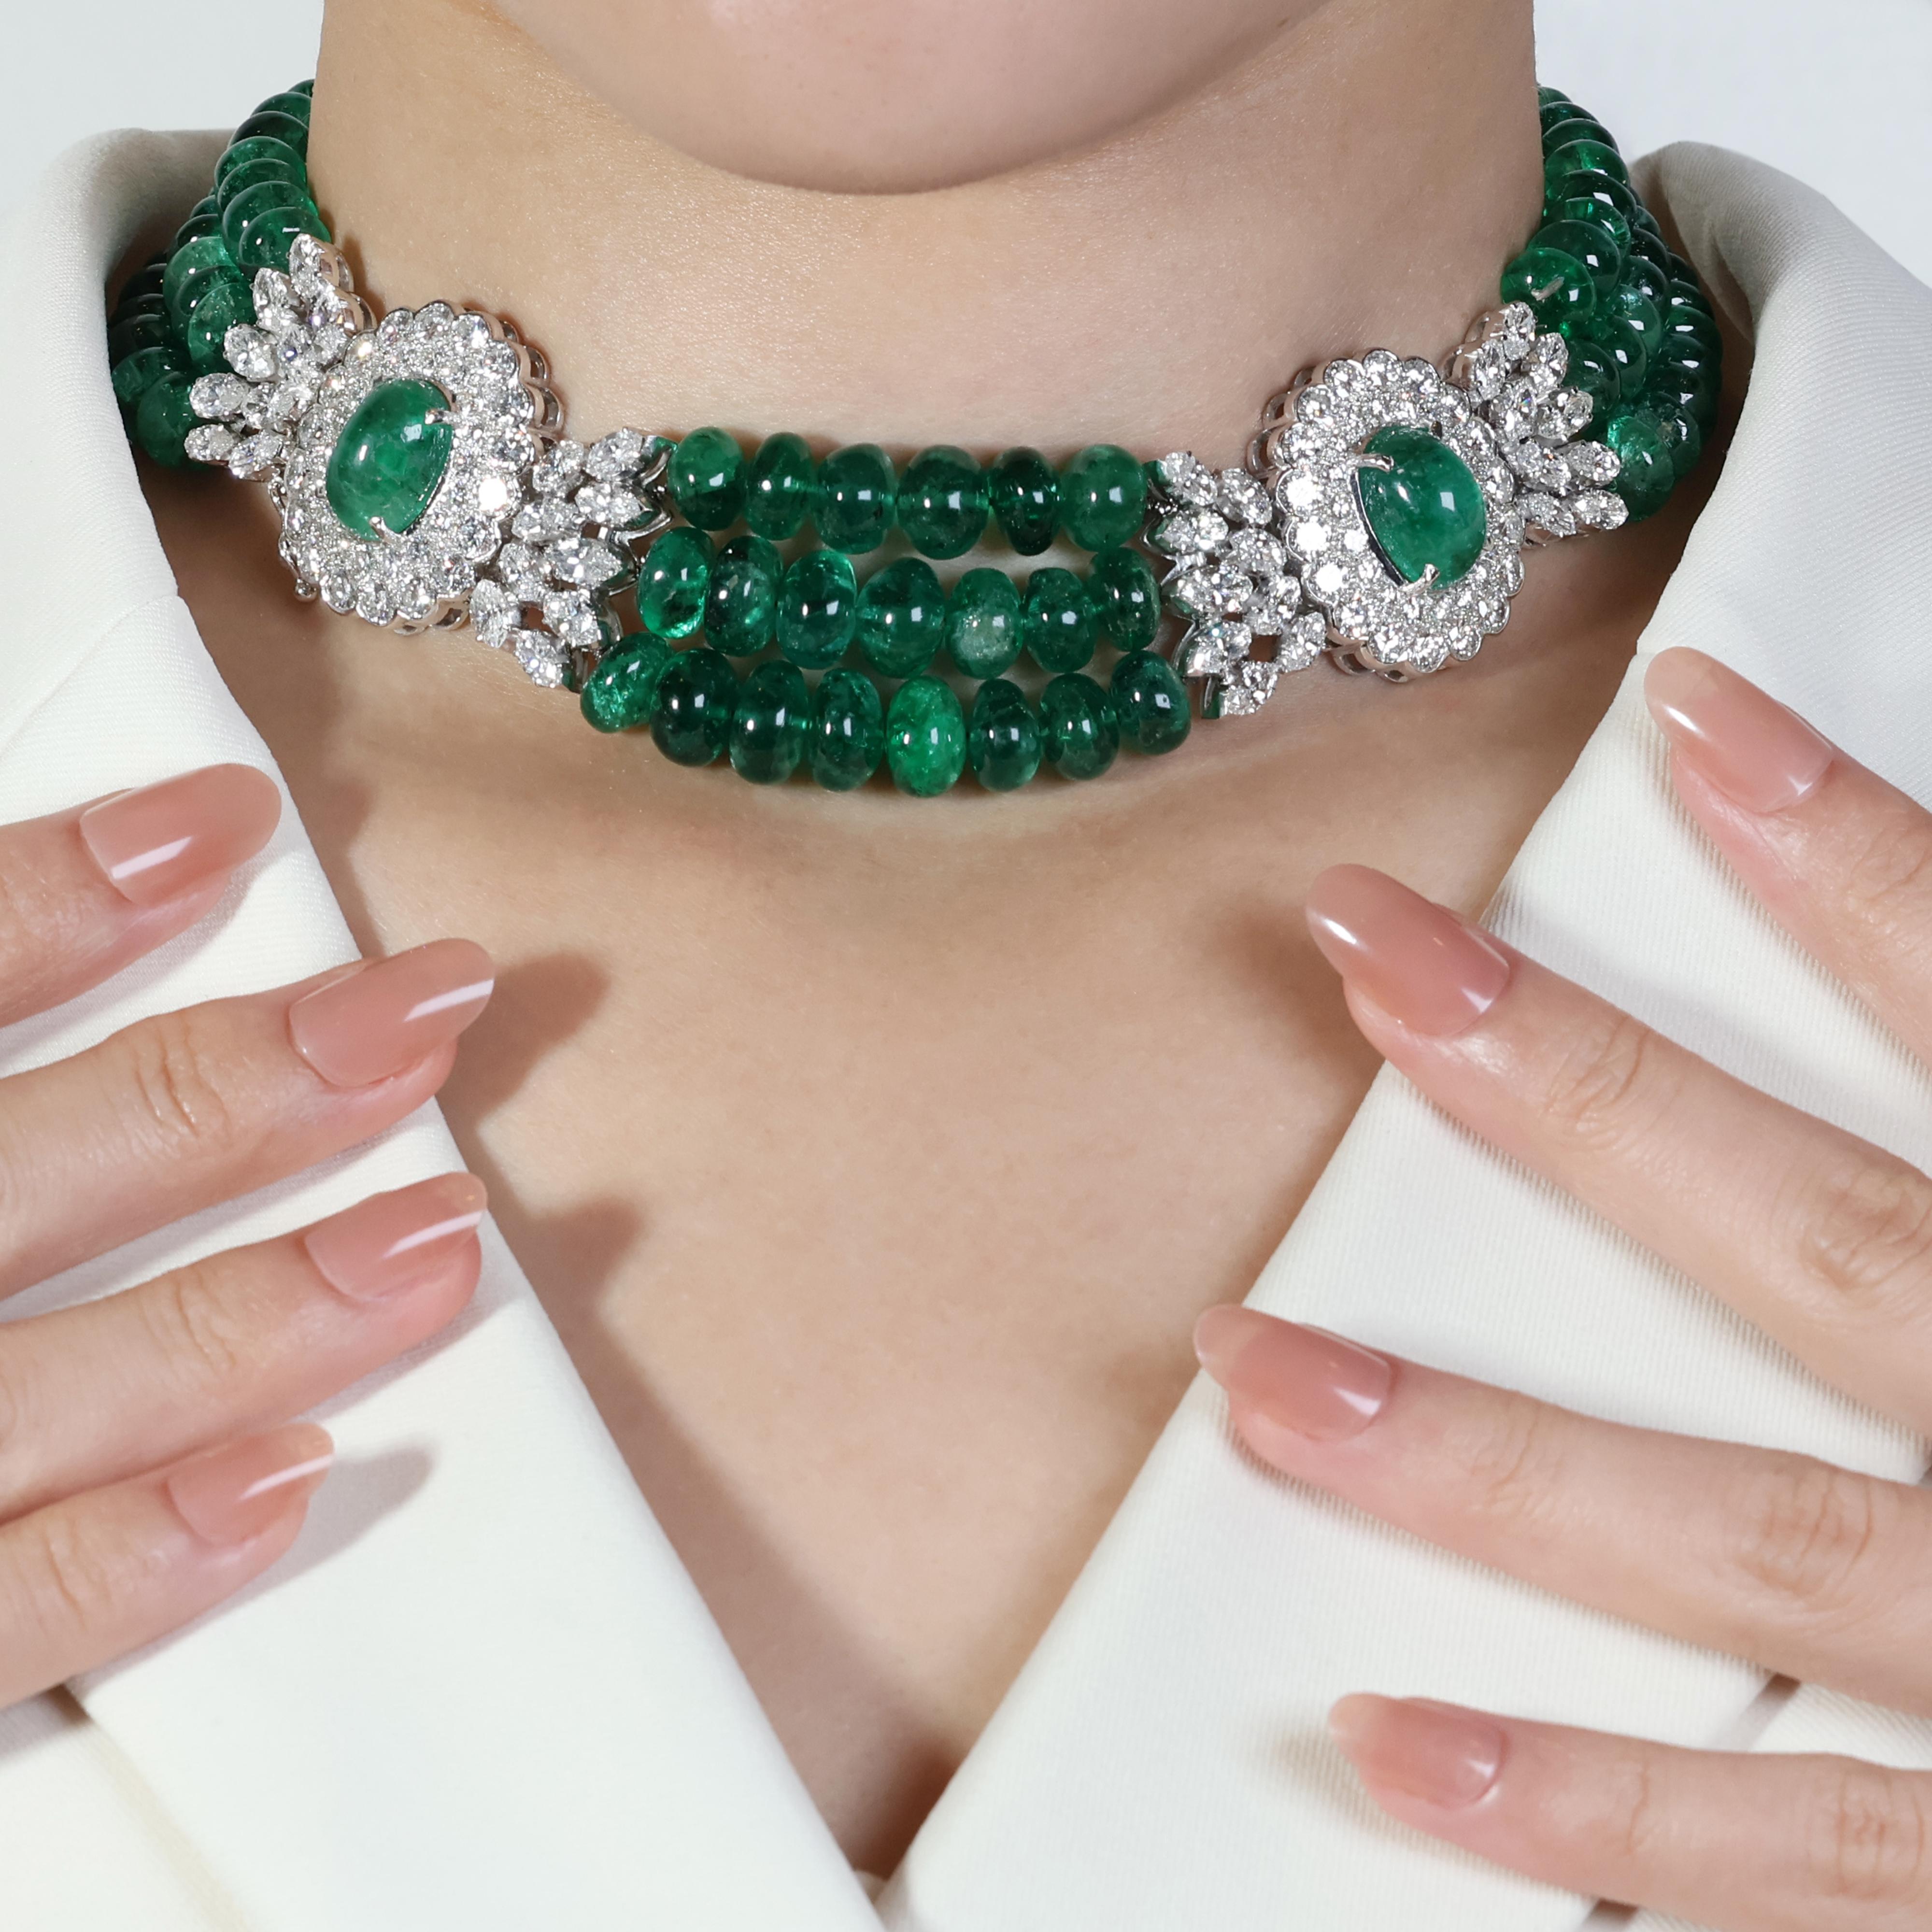 This captivating necklace showcases a breathtaking display of emeralds and diamonds, meticulously set in luxurious 18K white gold. The centerpiece features two mesmerizing cabochon emeralds boasting a combined weight of 16 carats and 143 pieces of